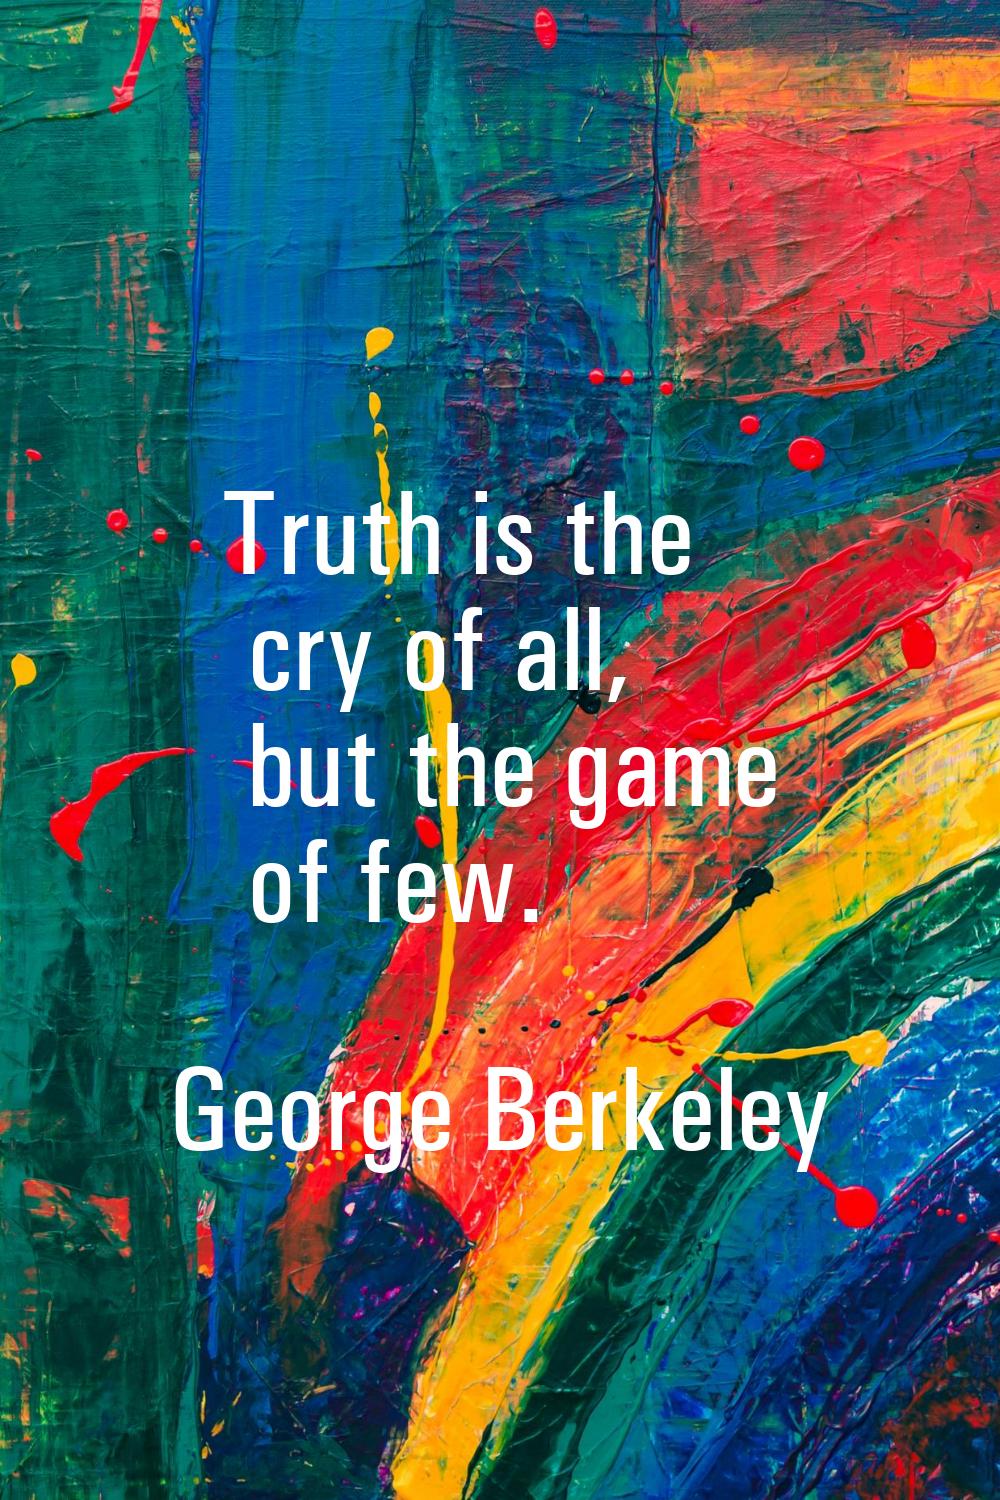 Truth is the cry of all, but the game of few.